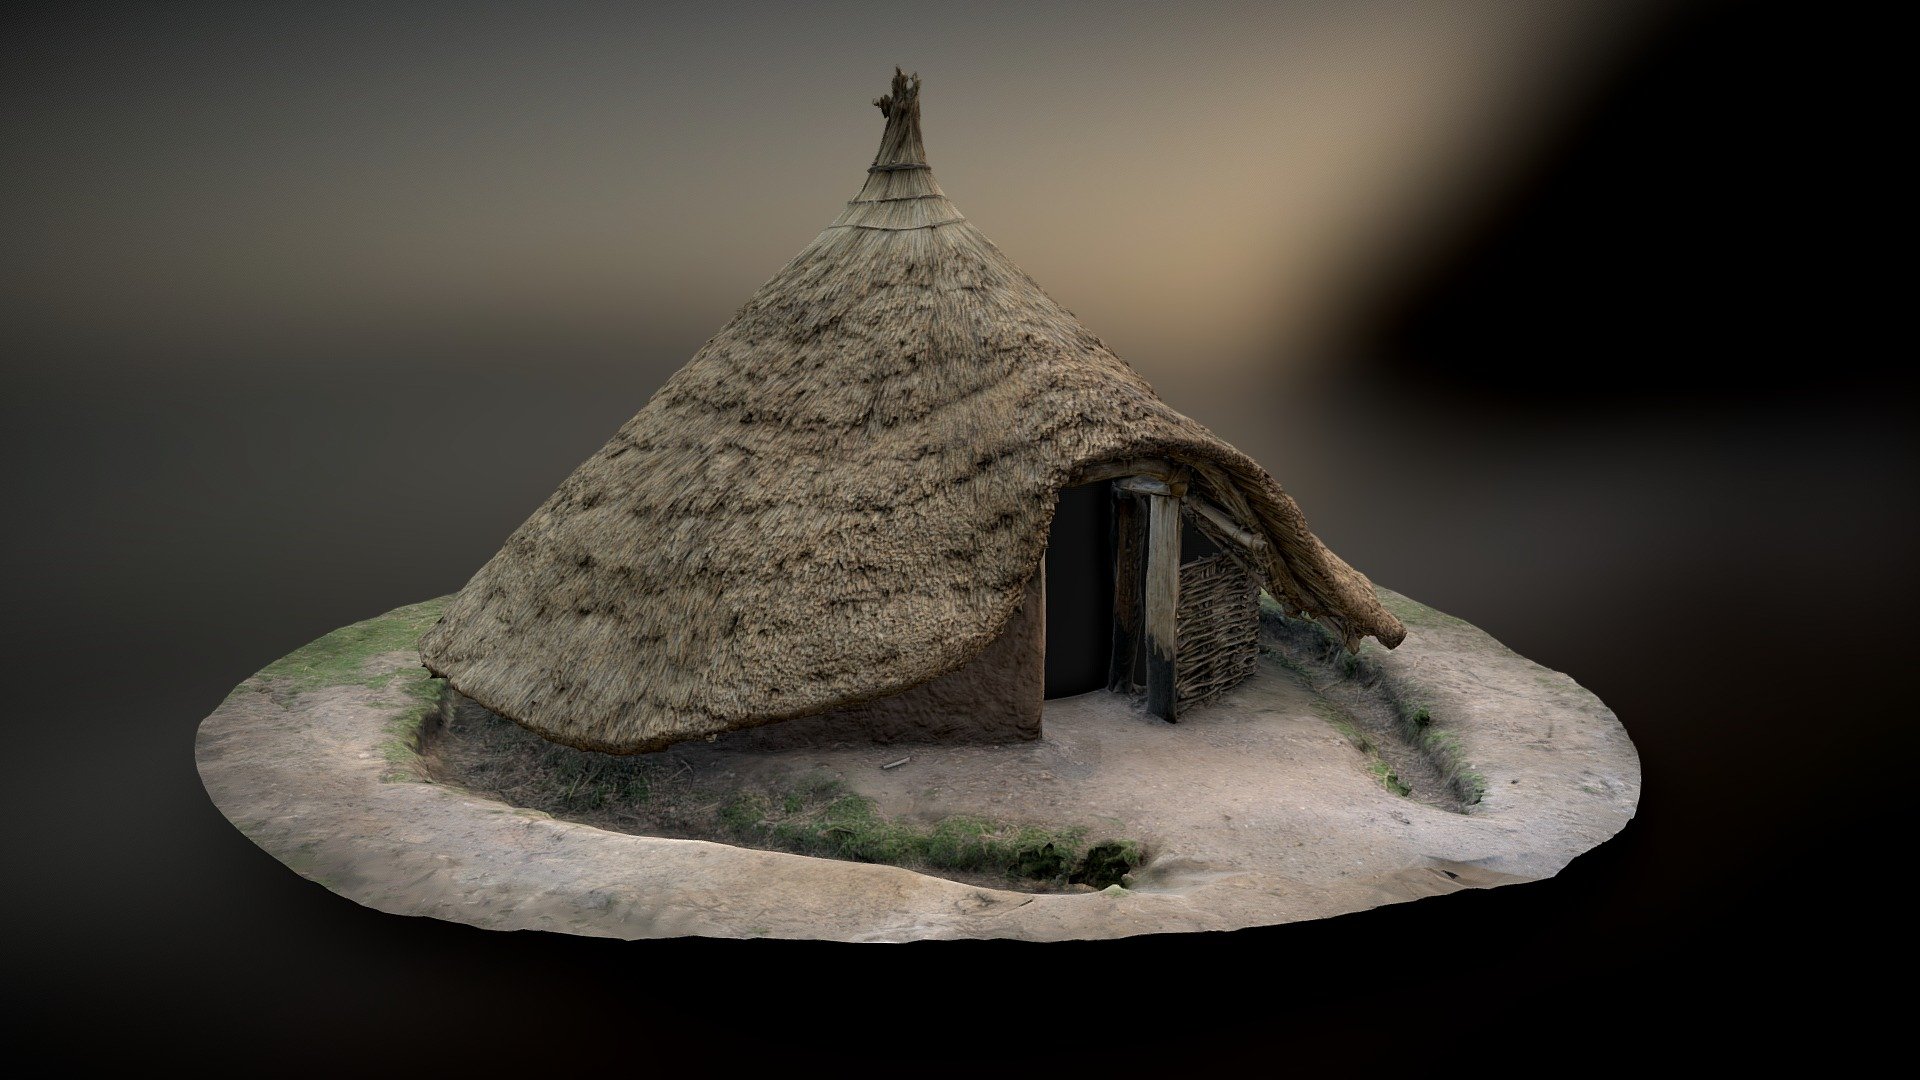 Spring is coming and the volunteers and archaologists are getting the wattle and daub walls up on roundhouse, or rather getting the daub up on the wattle.

Copmpare with some earlier scans of the roundhouse from February when the roof was not thatched: https://sketchfab.com/nebulousflynn/collections/living-in-the-round-8dd663ef2e364b97b00c9f1c92f0cb58

Captured on a visit to the Living in the Round project. I challenged myself to see what outputs I could get with just my phone as the capture device.

587 images Canon G7X, Metashape, Blender - Iron Age Roundhouse Reconstruction - April 2024 - Download Free 3D model by Thomas Flynn (@nebulousflynn) 3d model